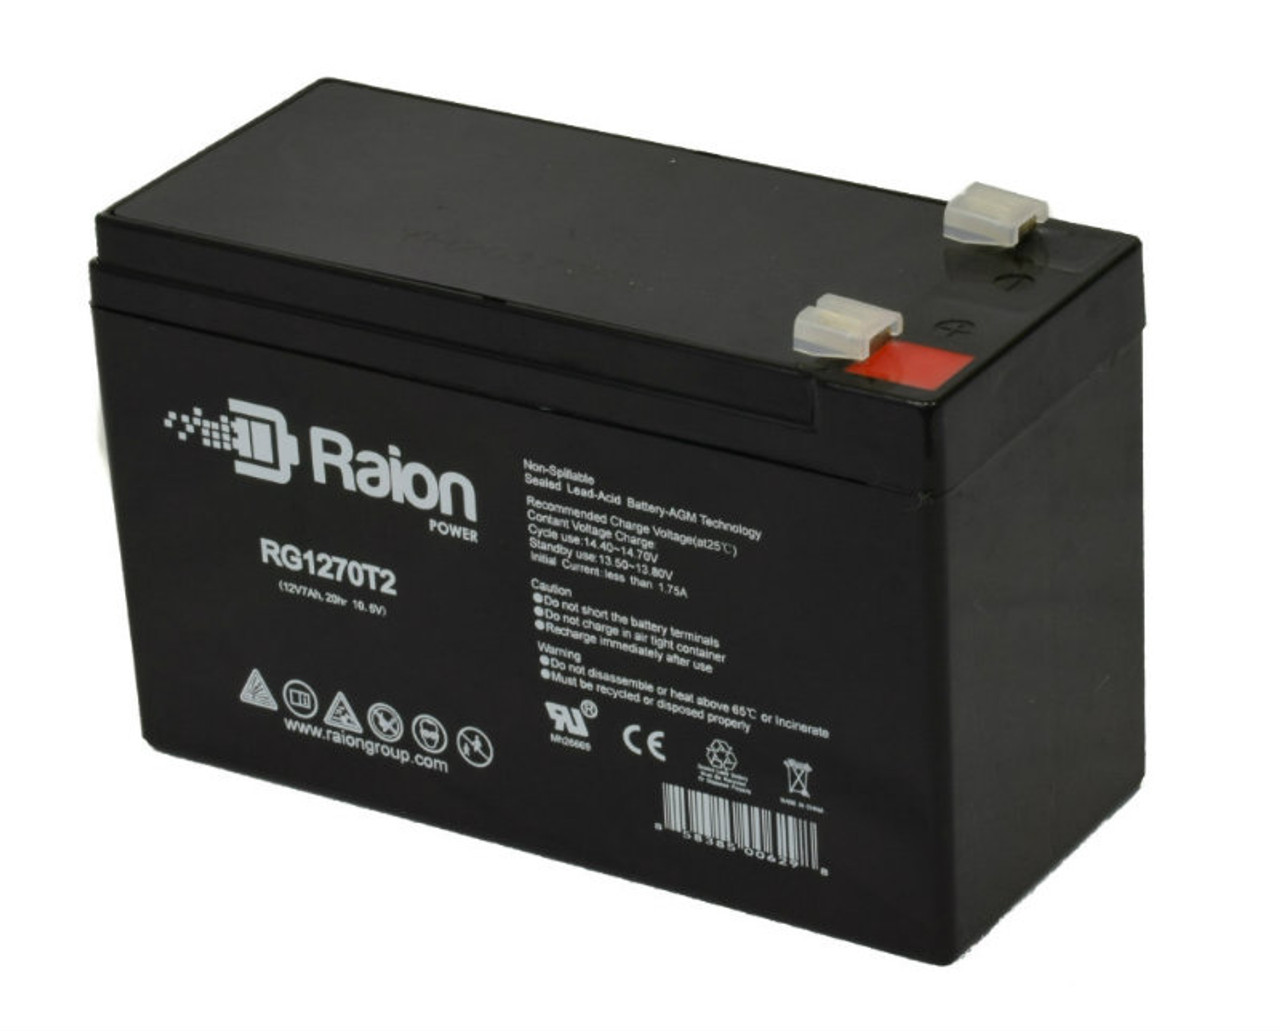 Raion Power RG1270T1 12V 7Ah Non-Spillable Replacement Battery for Power Kingdom PS7-12